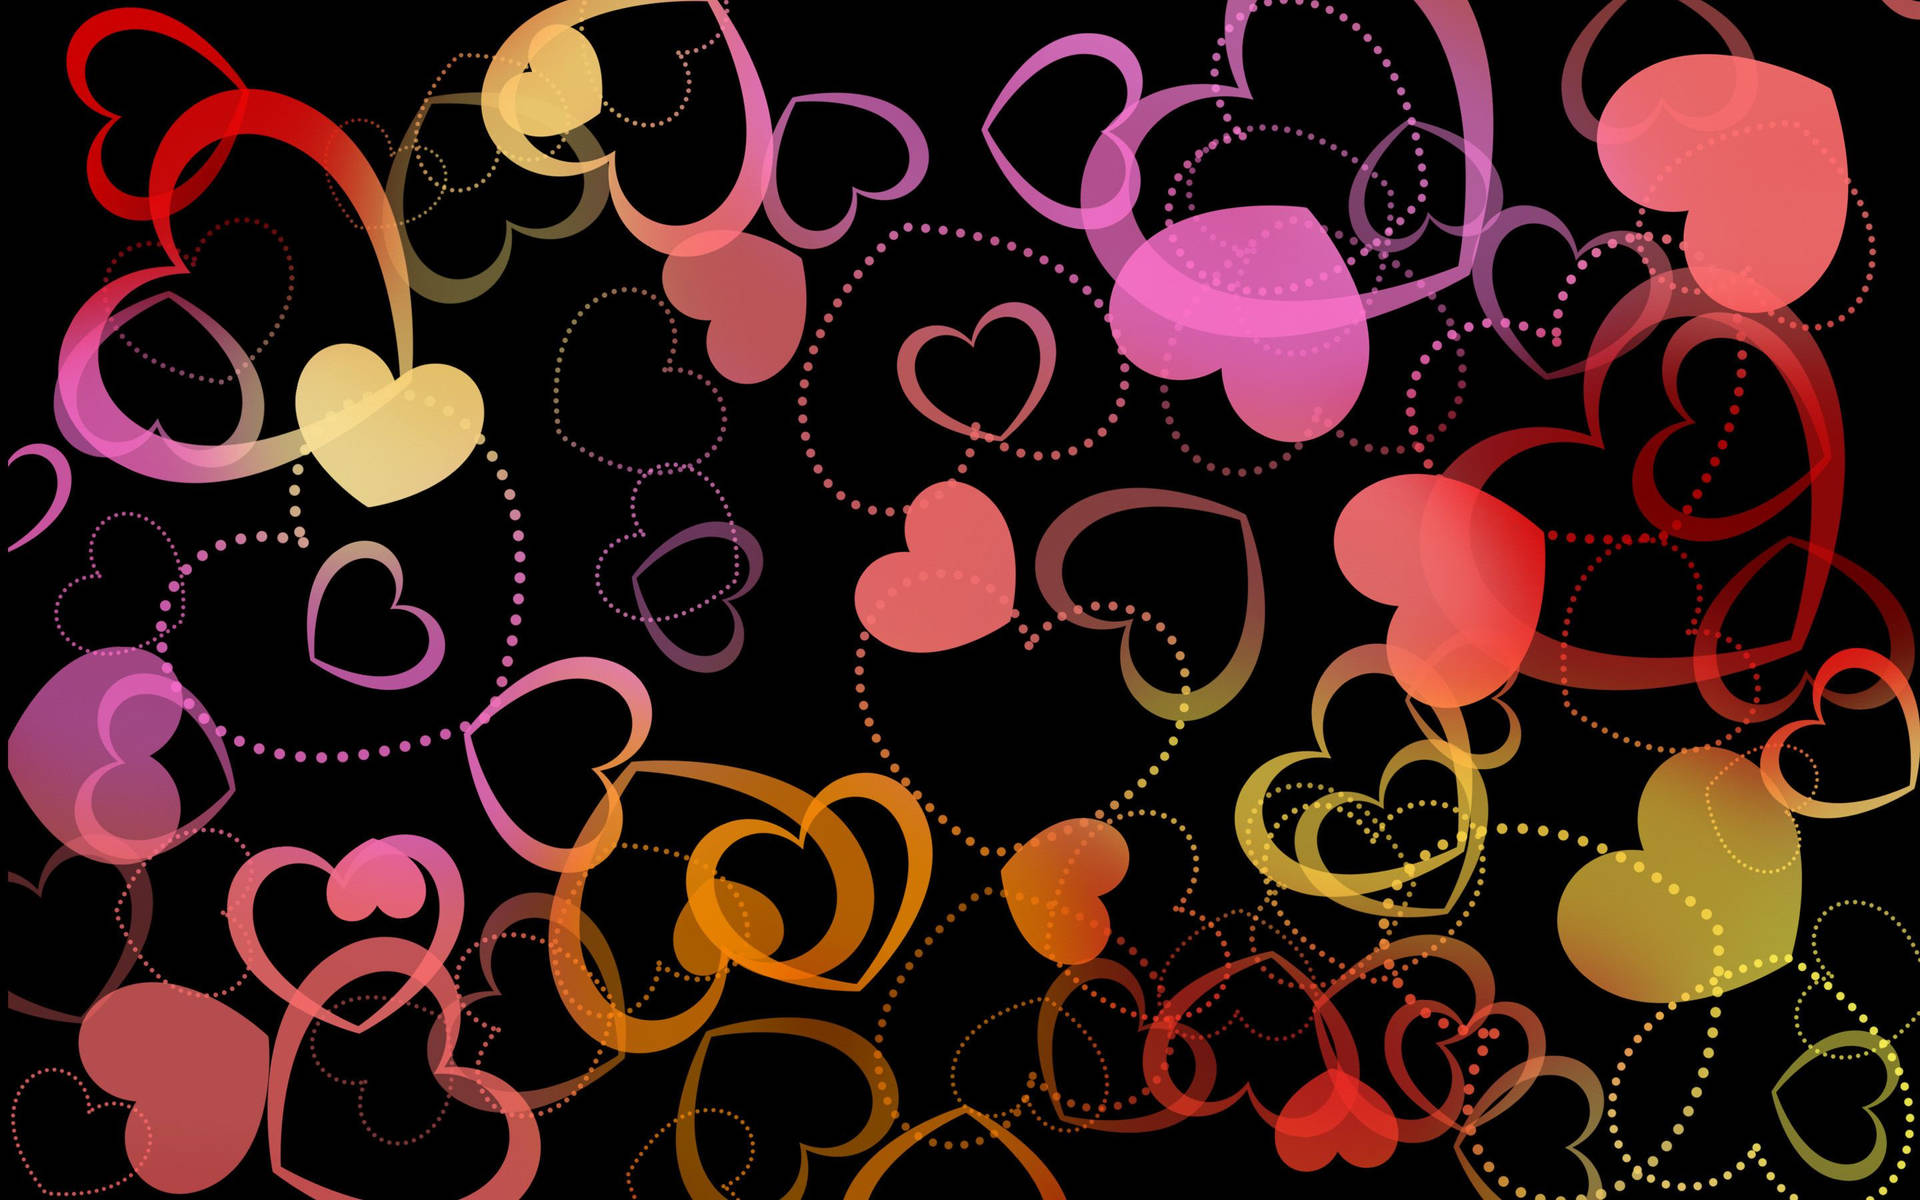 Show your love with this beautiful 4K wallpaper of hearts Wallpaper